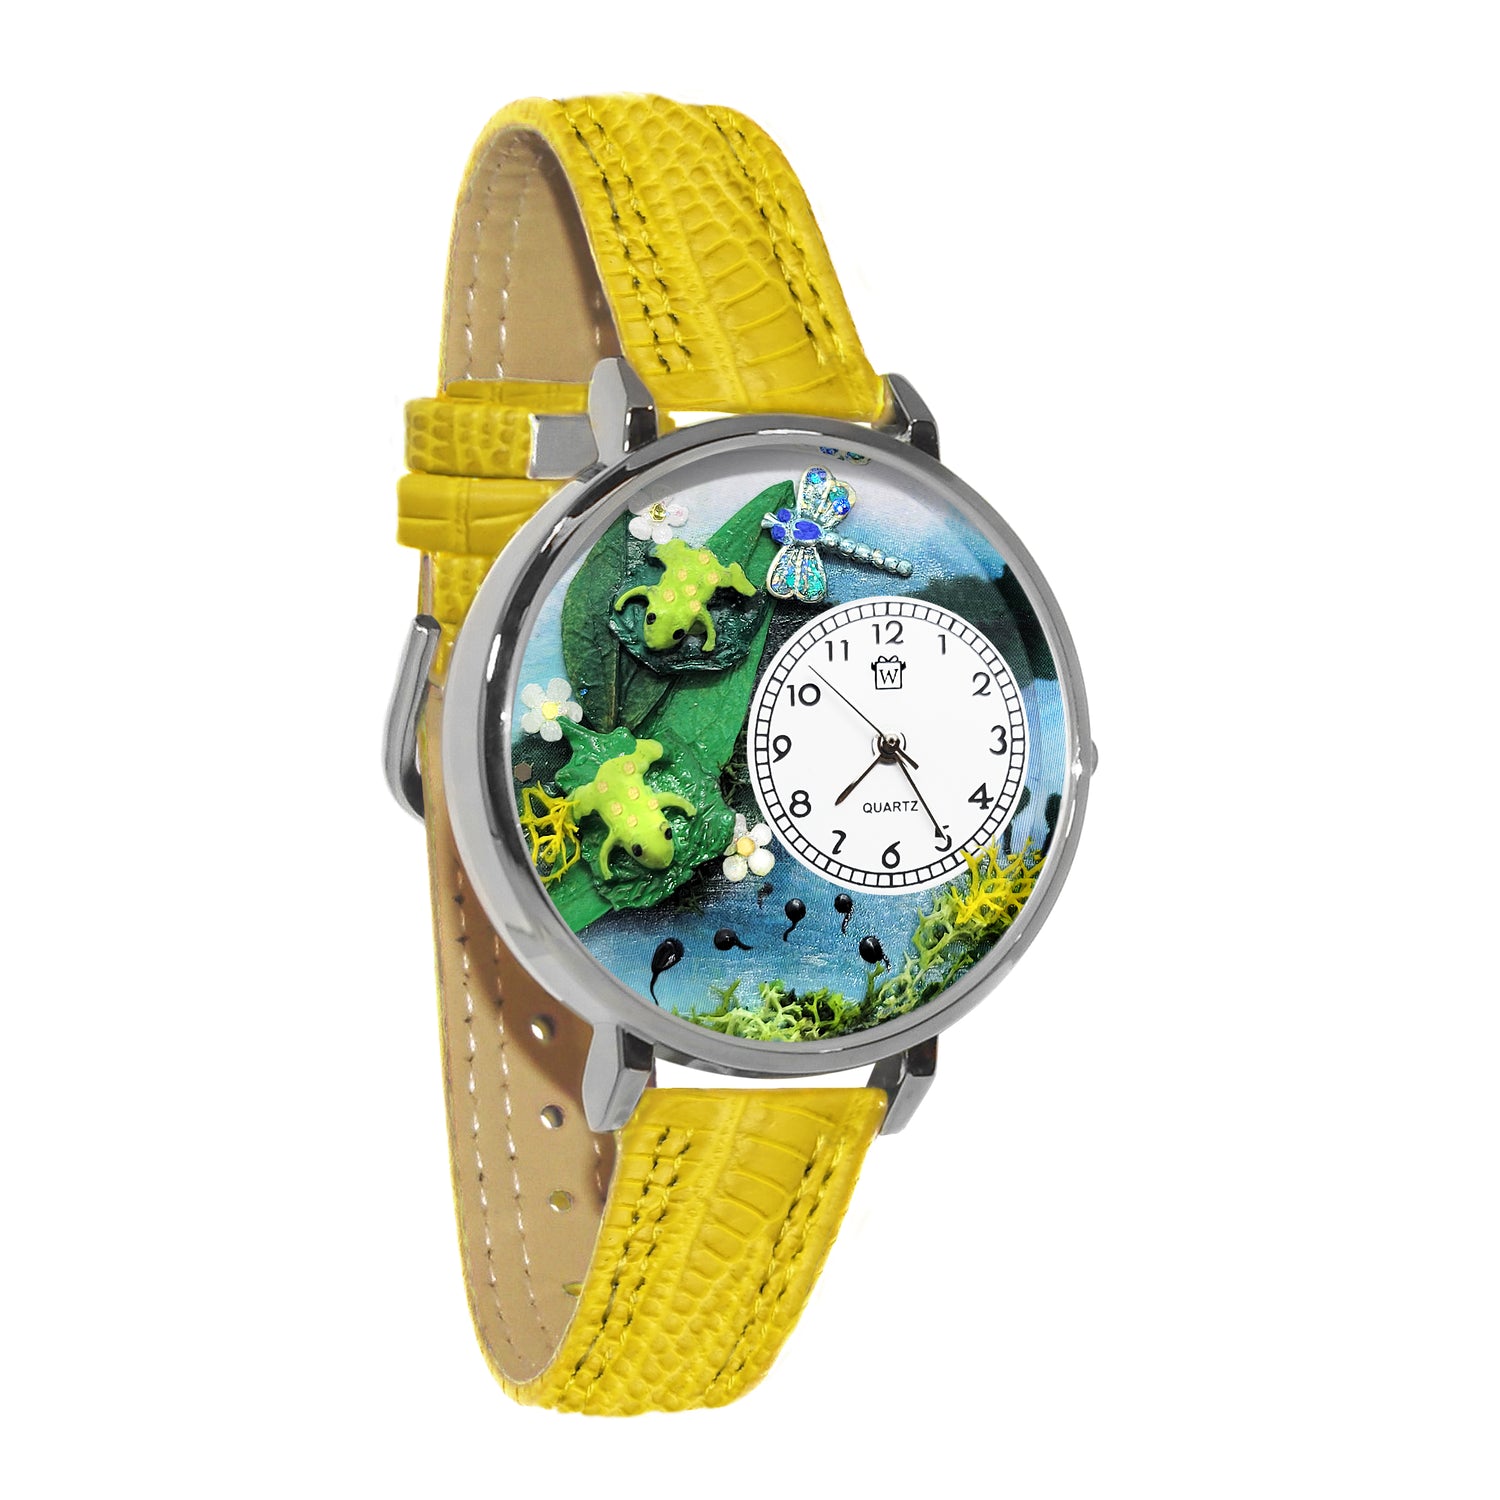 Whimsical Gifts | Frogs 3D Watch Large Style | Handmade in USA | Animal Lover | Outdoor & Garden | Novelty Unique Fun Miniatures Gift | Silver Finish Yellow Leather Watch Band